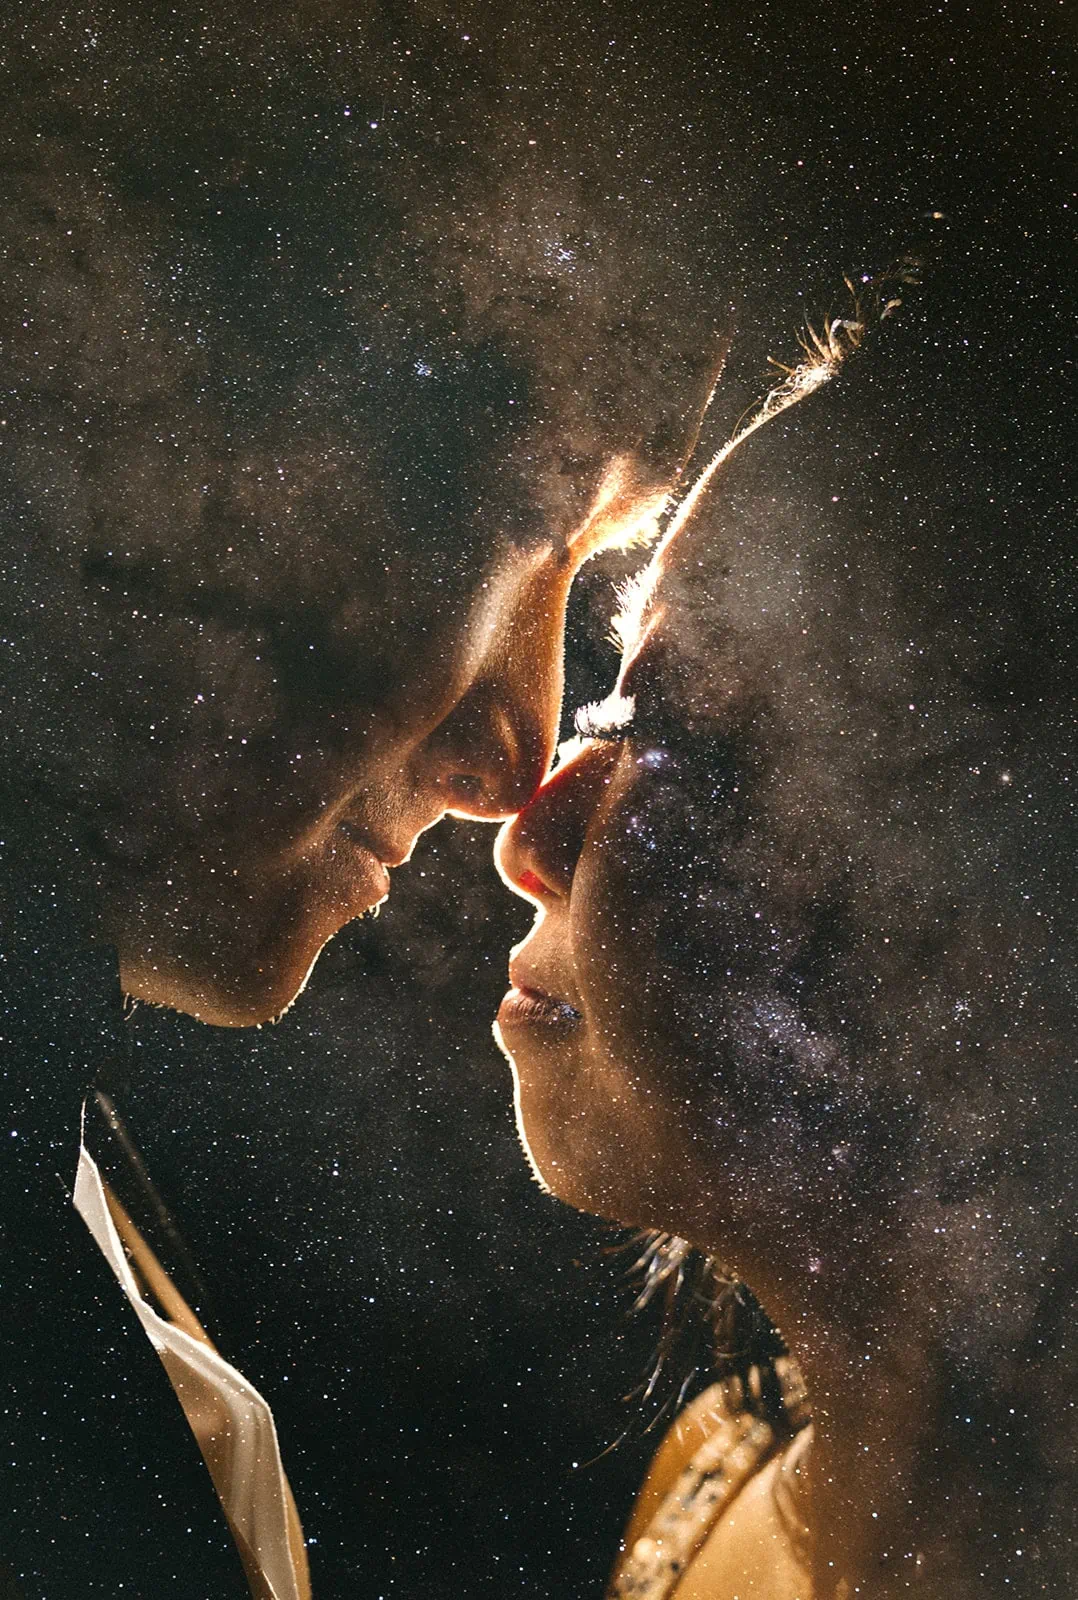 A double exposure of a close up portrait of a couple with their faces and the milkyway stars on top